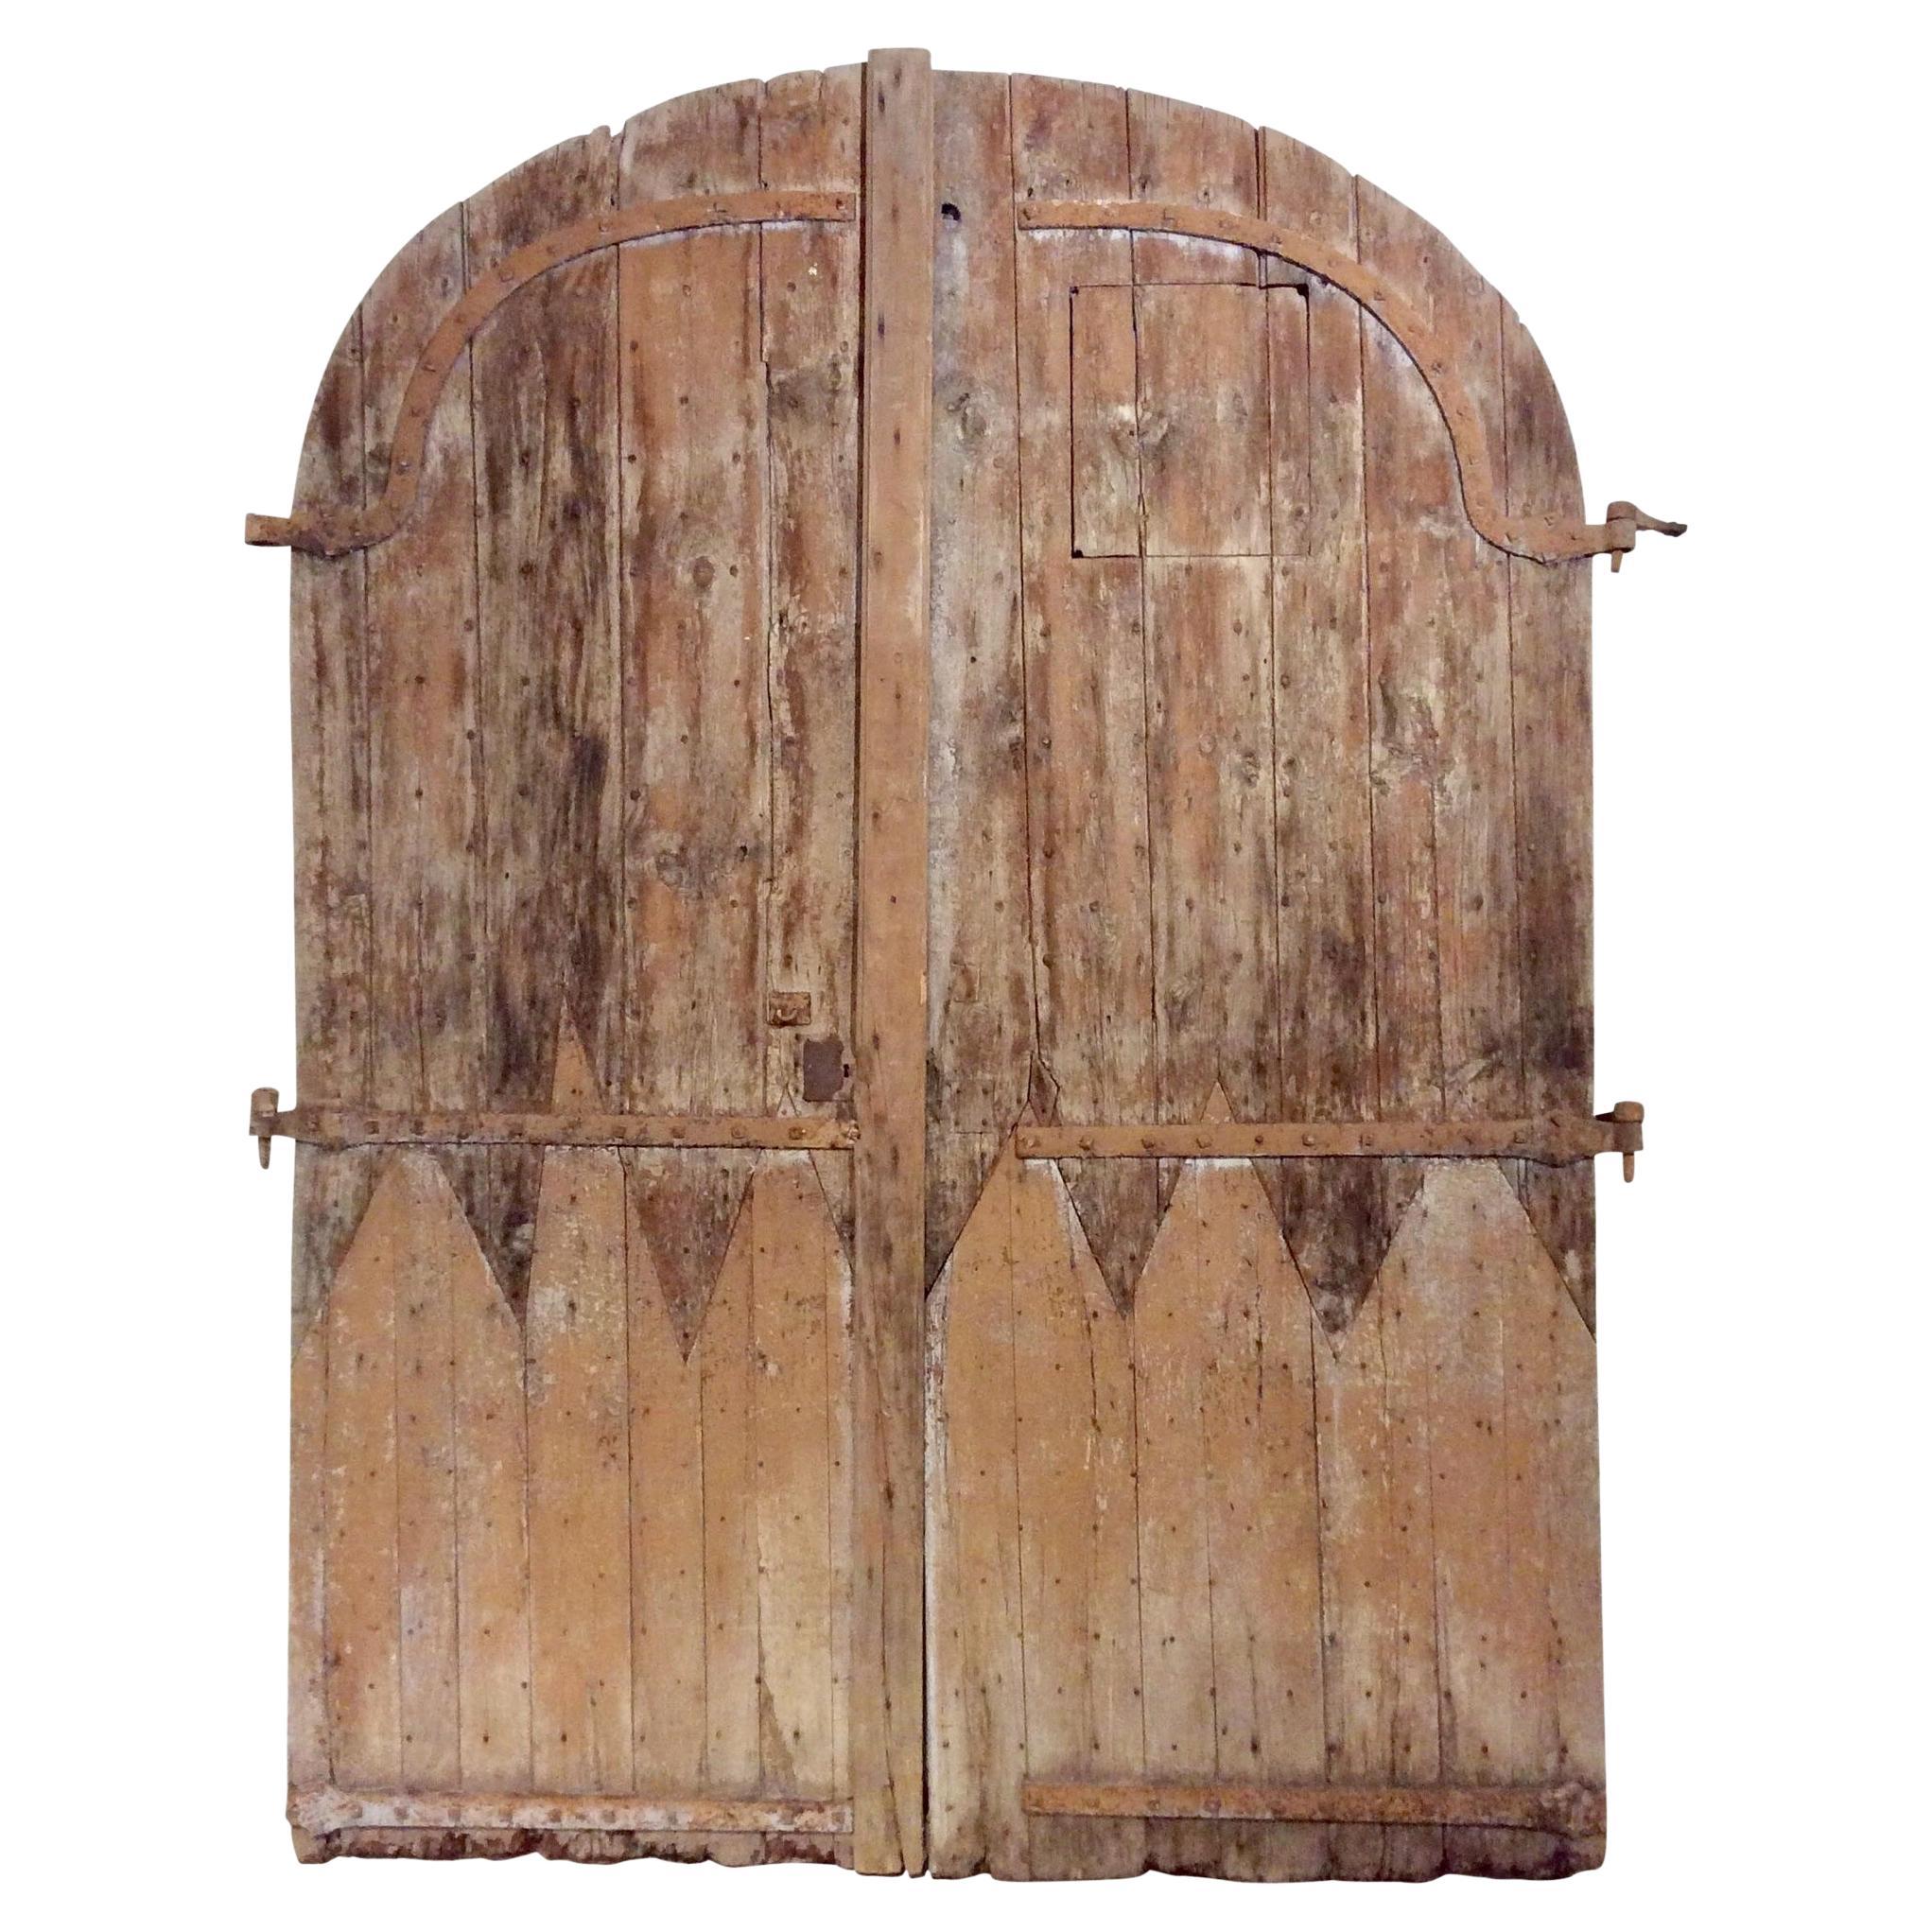 Early 1800s French Architectural Arched Wood Doors With Original Iron Hardware